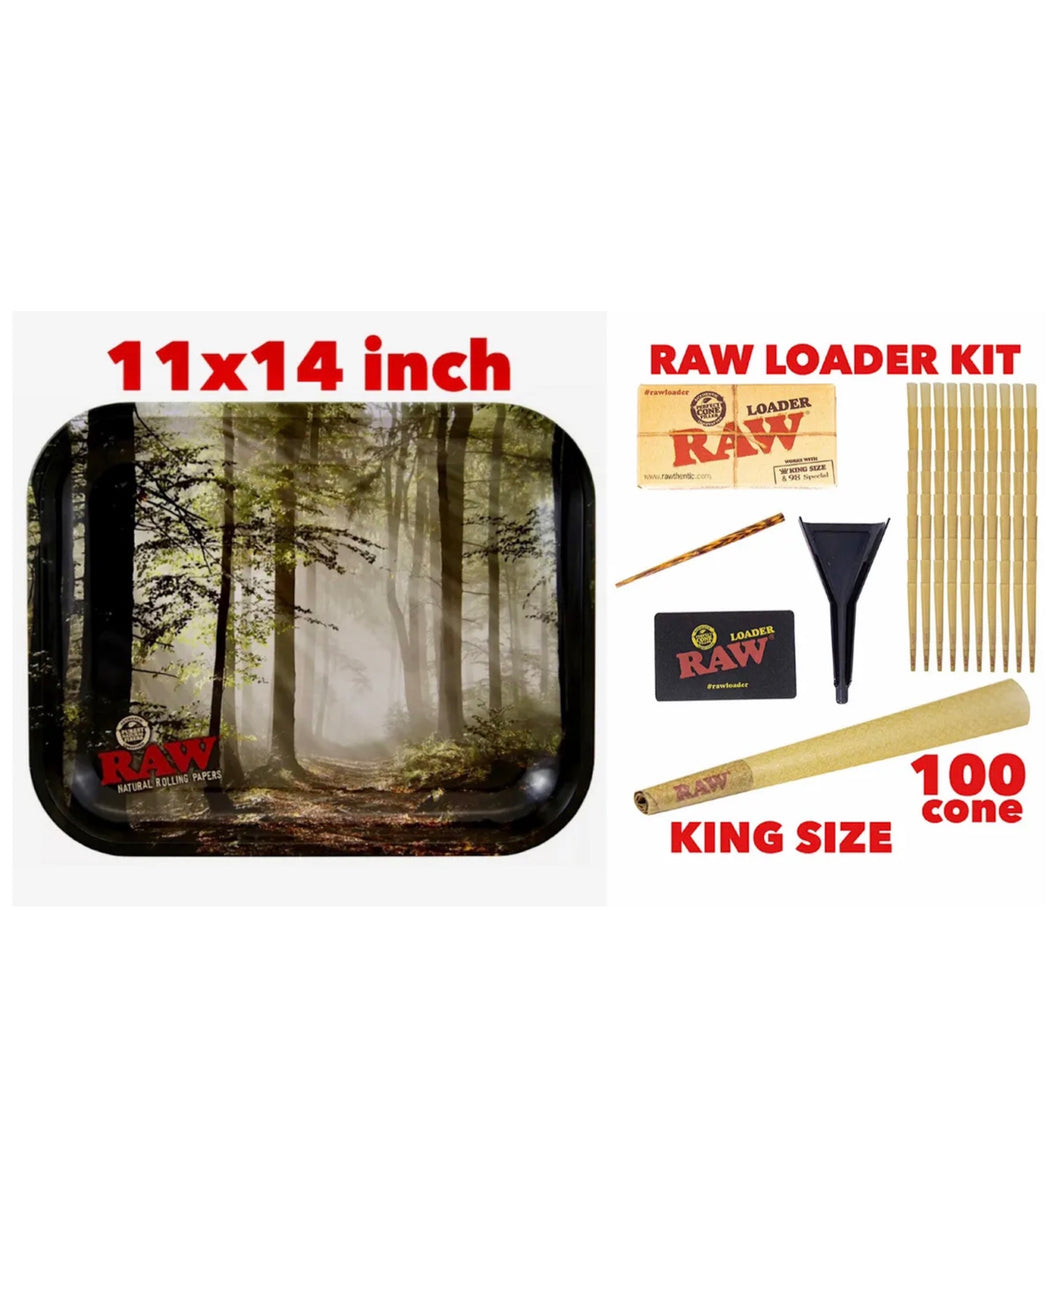 raw rolling metal tray(FOREST)large+raw king size cone(100 pack)+cone loader kit